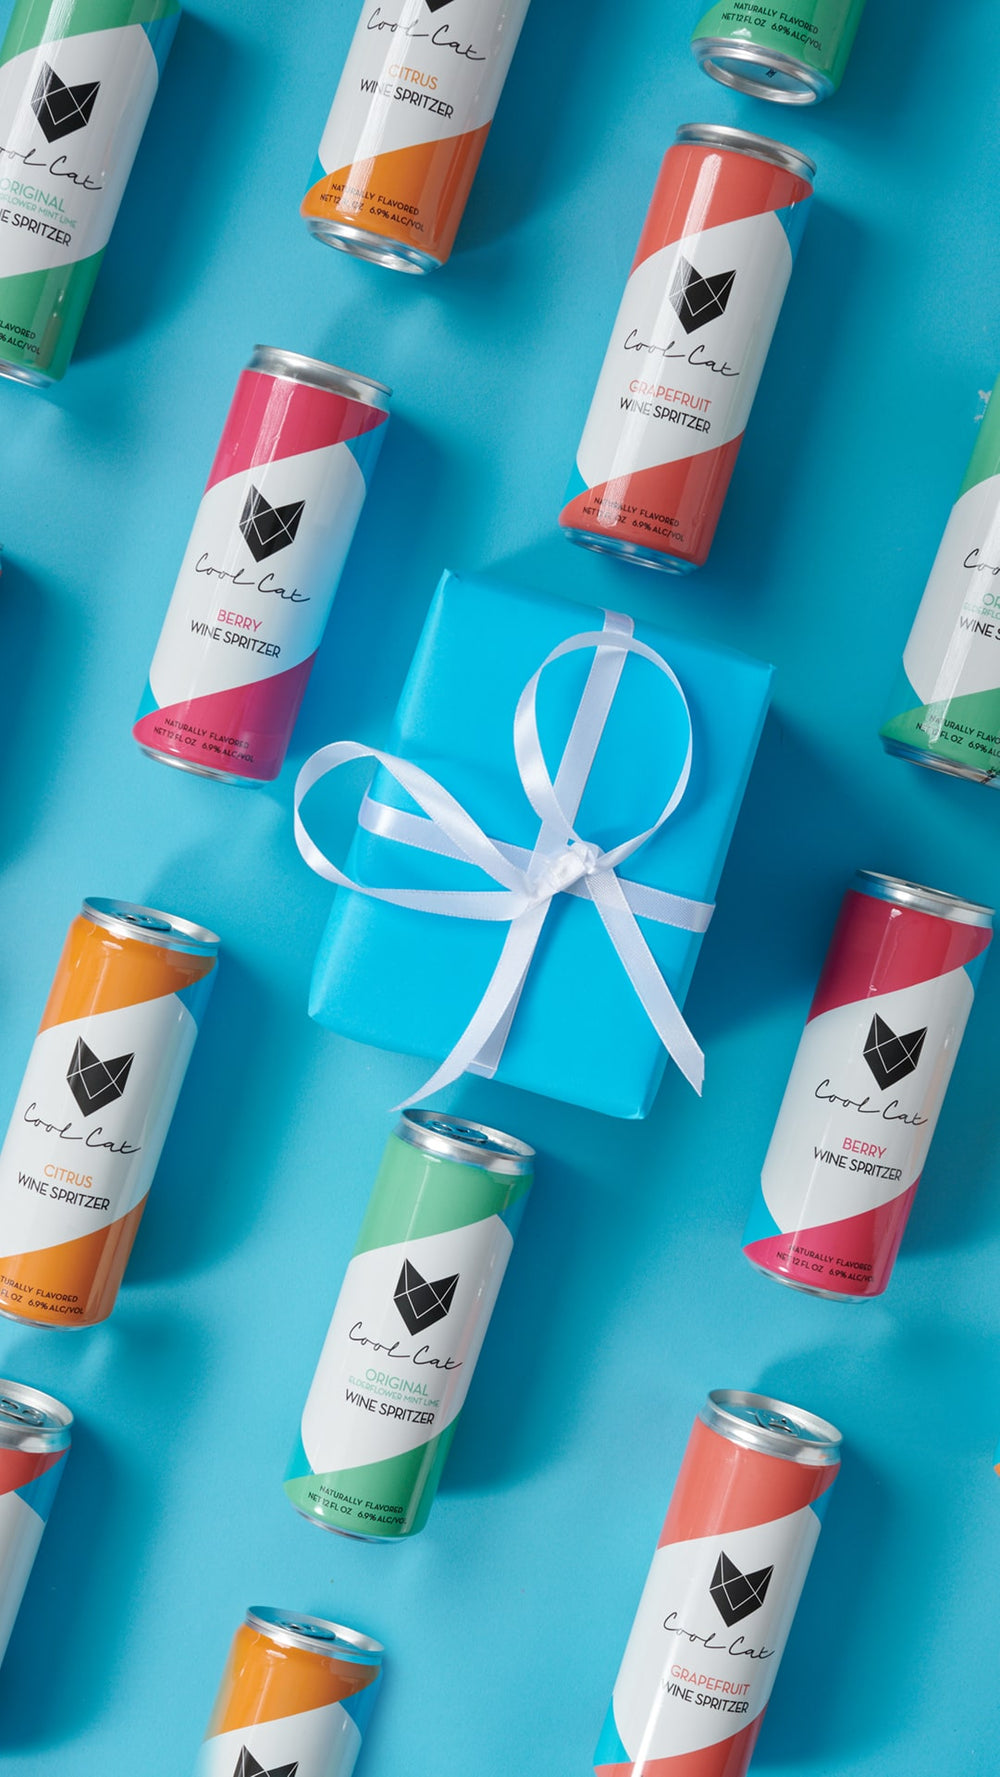 Every flavor of Cool Cat Sparkling Cocktail surrounding a holiday present.